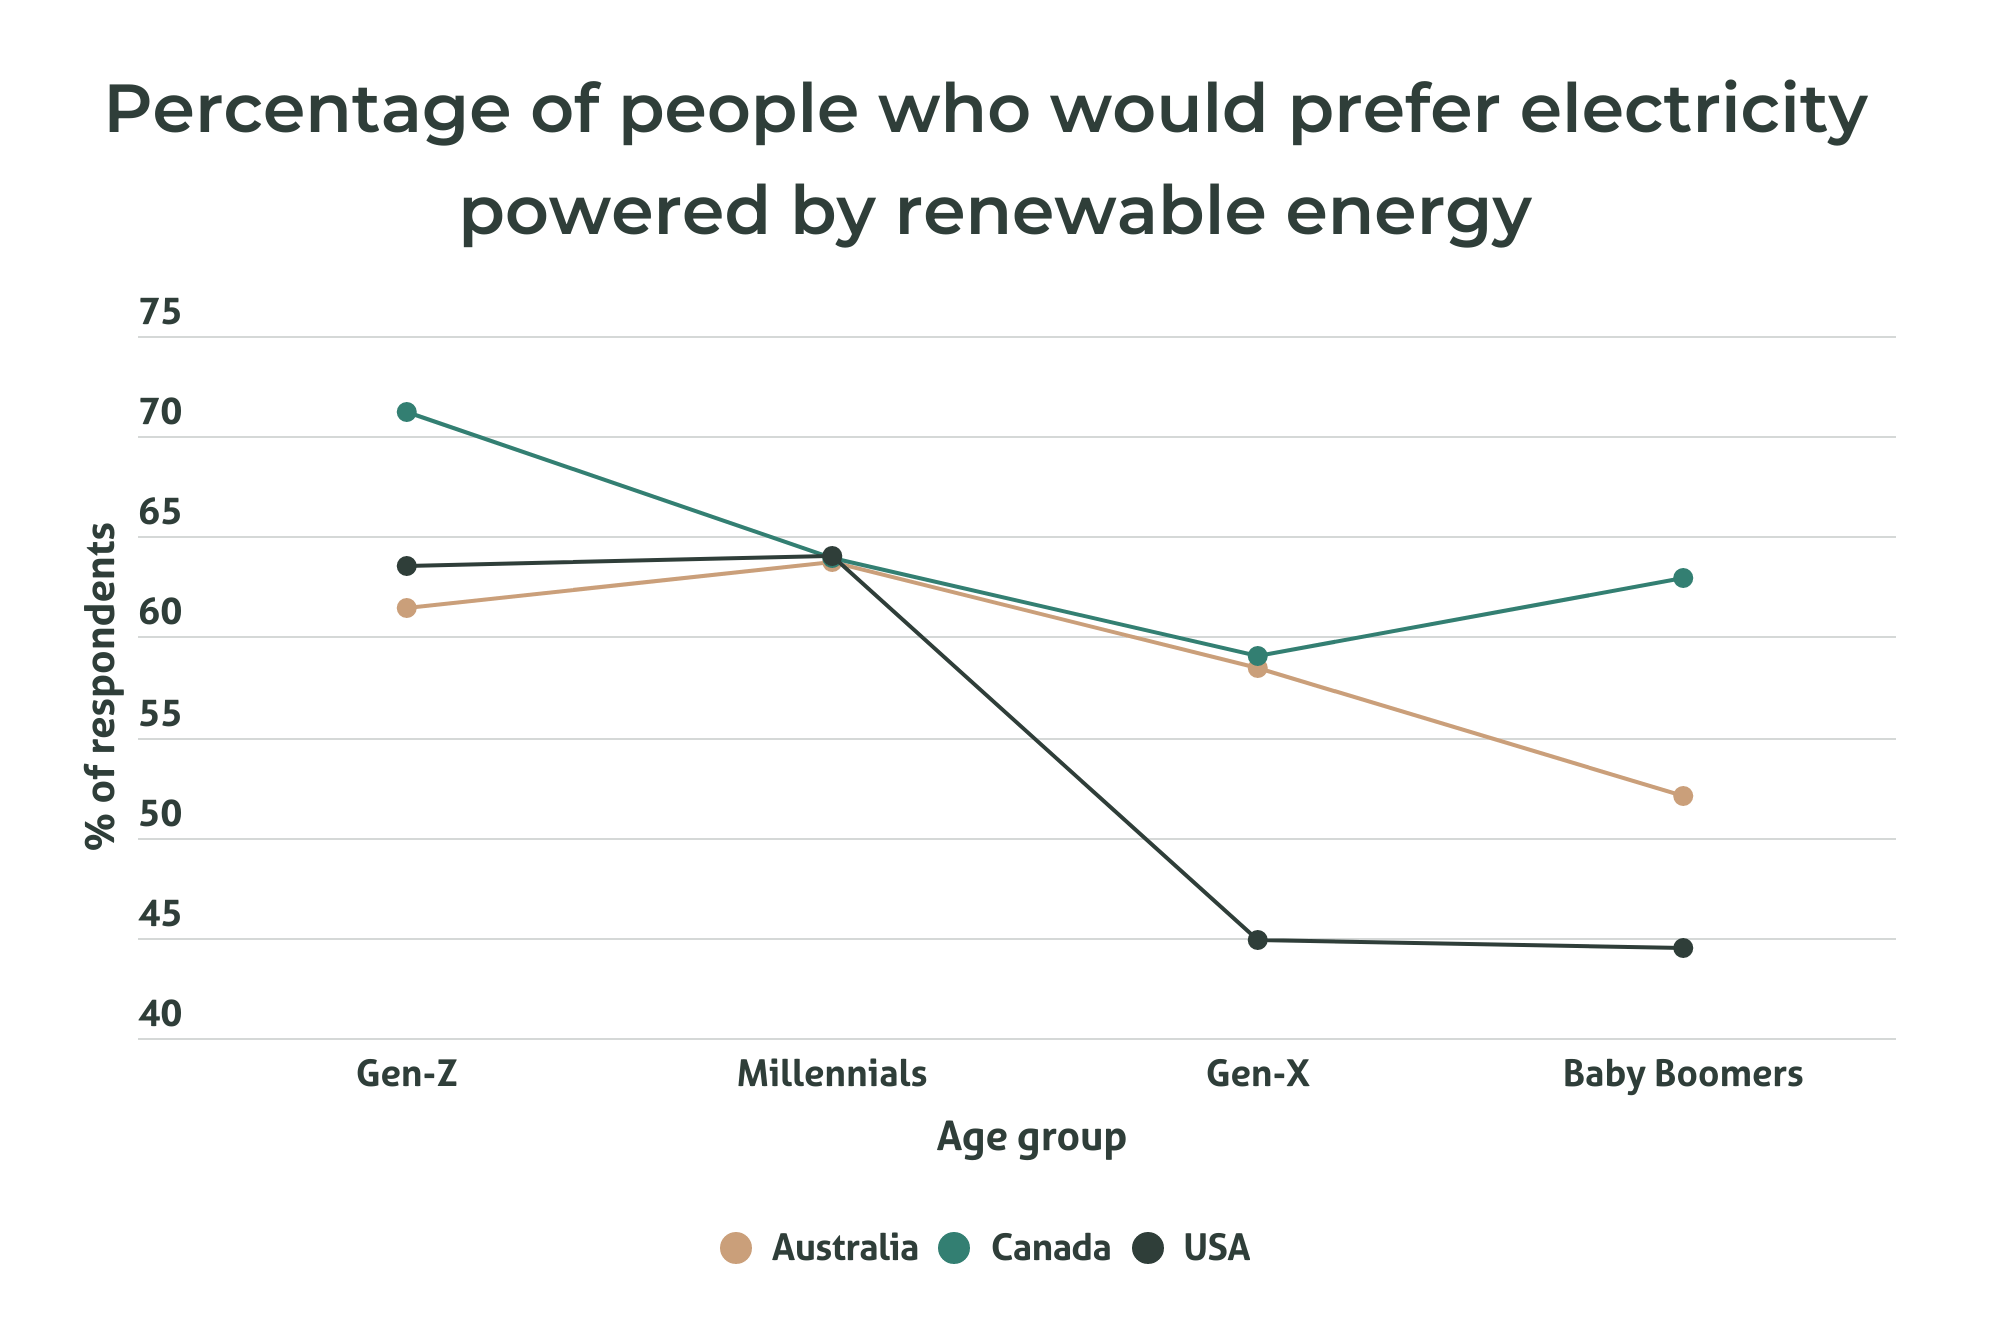 Line graph showing the percentage of people who would prefer electricity powered by renewable energy, by age and nationality